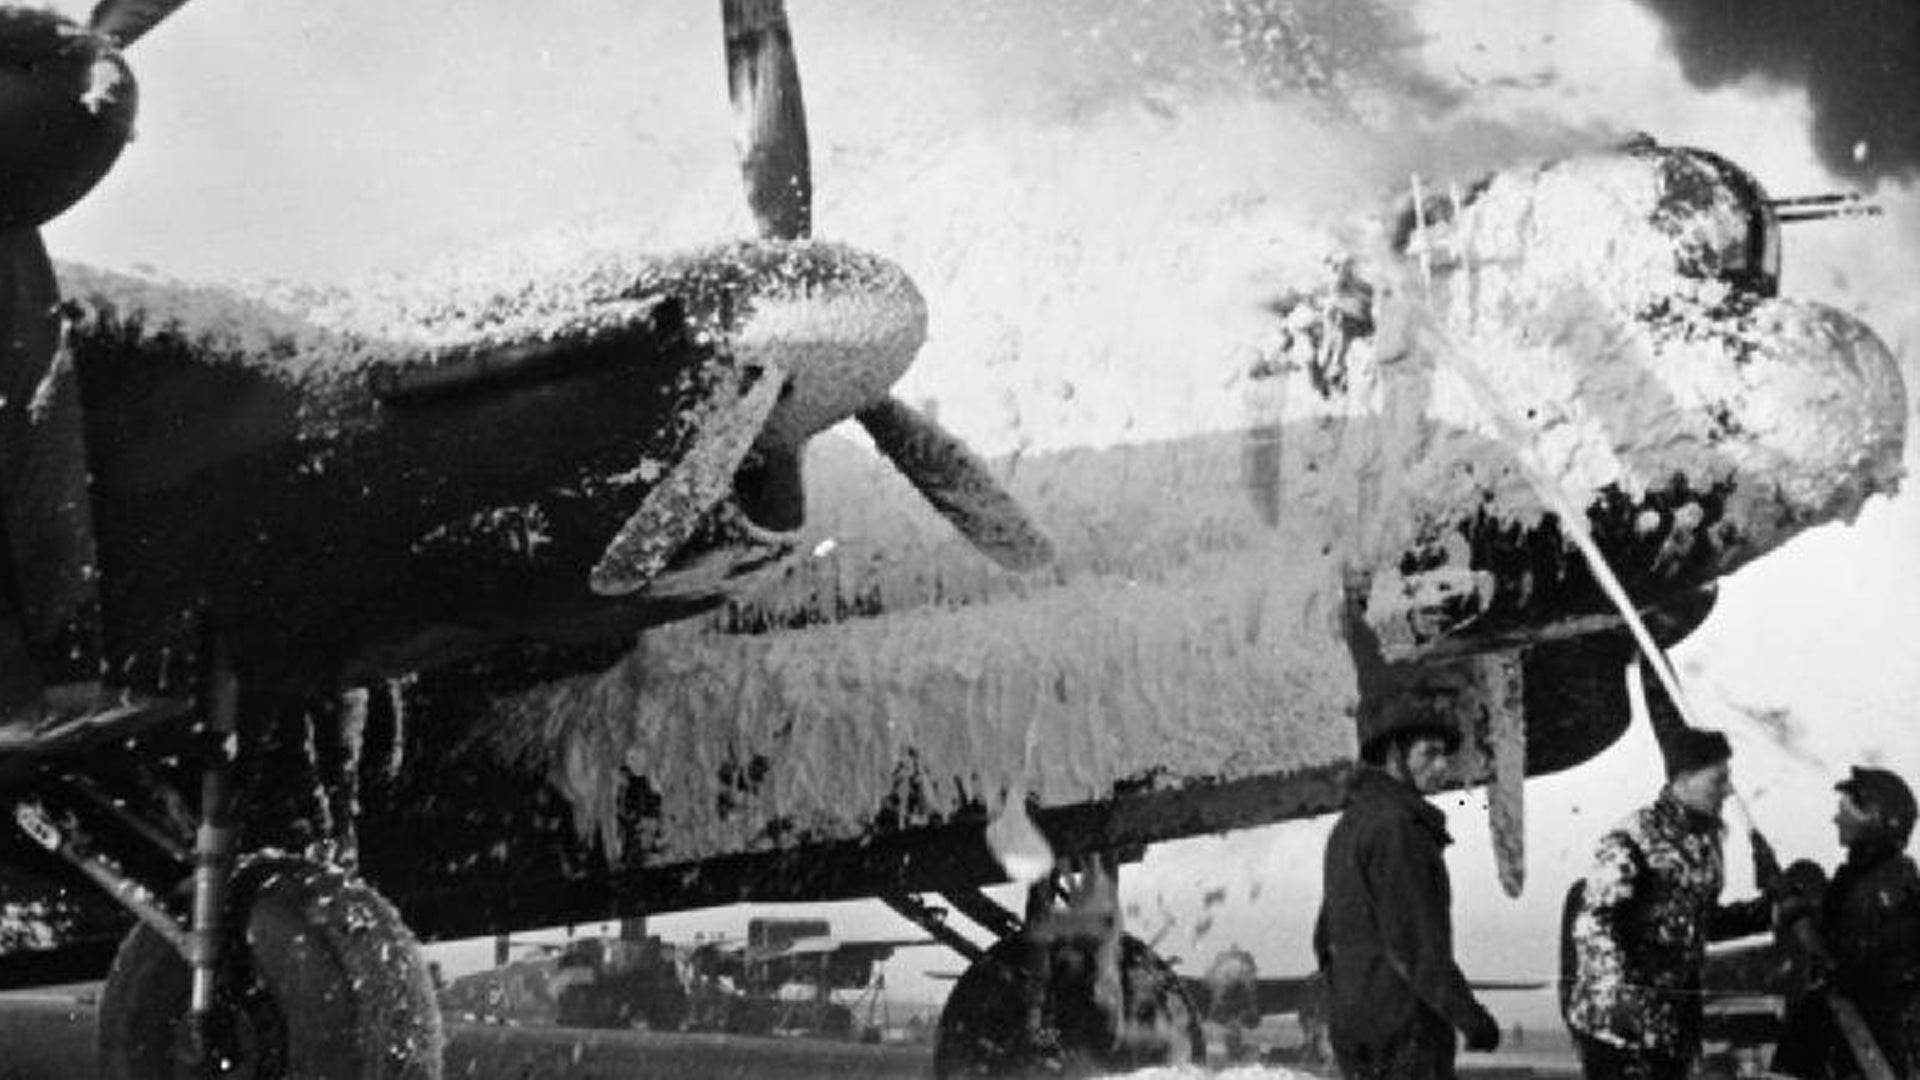 Fire crews cover an Avro Lancaster of Bomber Command with foam in an effort to save it from burning, at B58/Melsbroek, Belgium, following the attack on the airfield by Luftwaffe fighter-bombers in Operation Bodenplatte during World War II. (Royal Air Force)